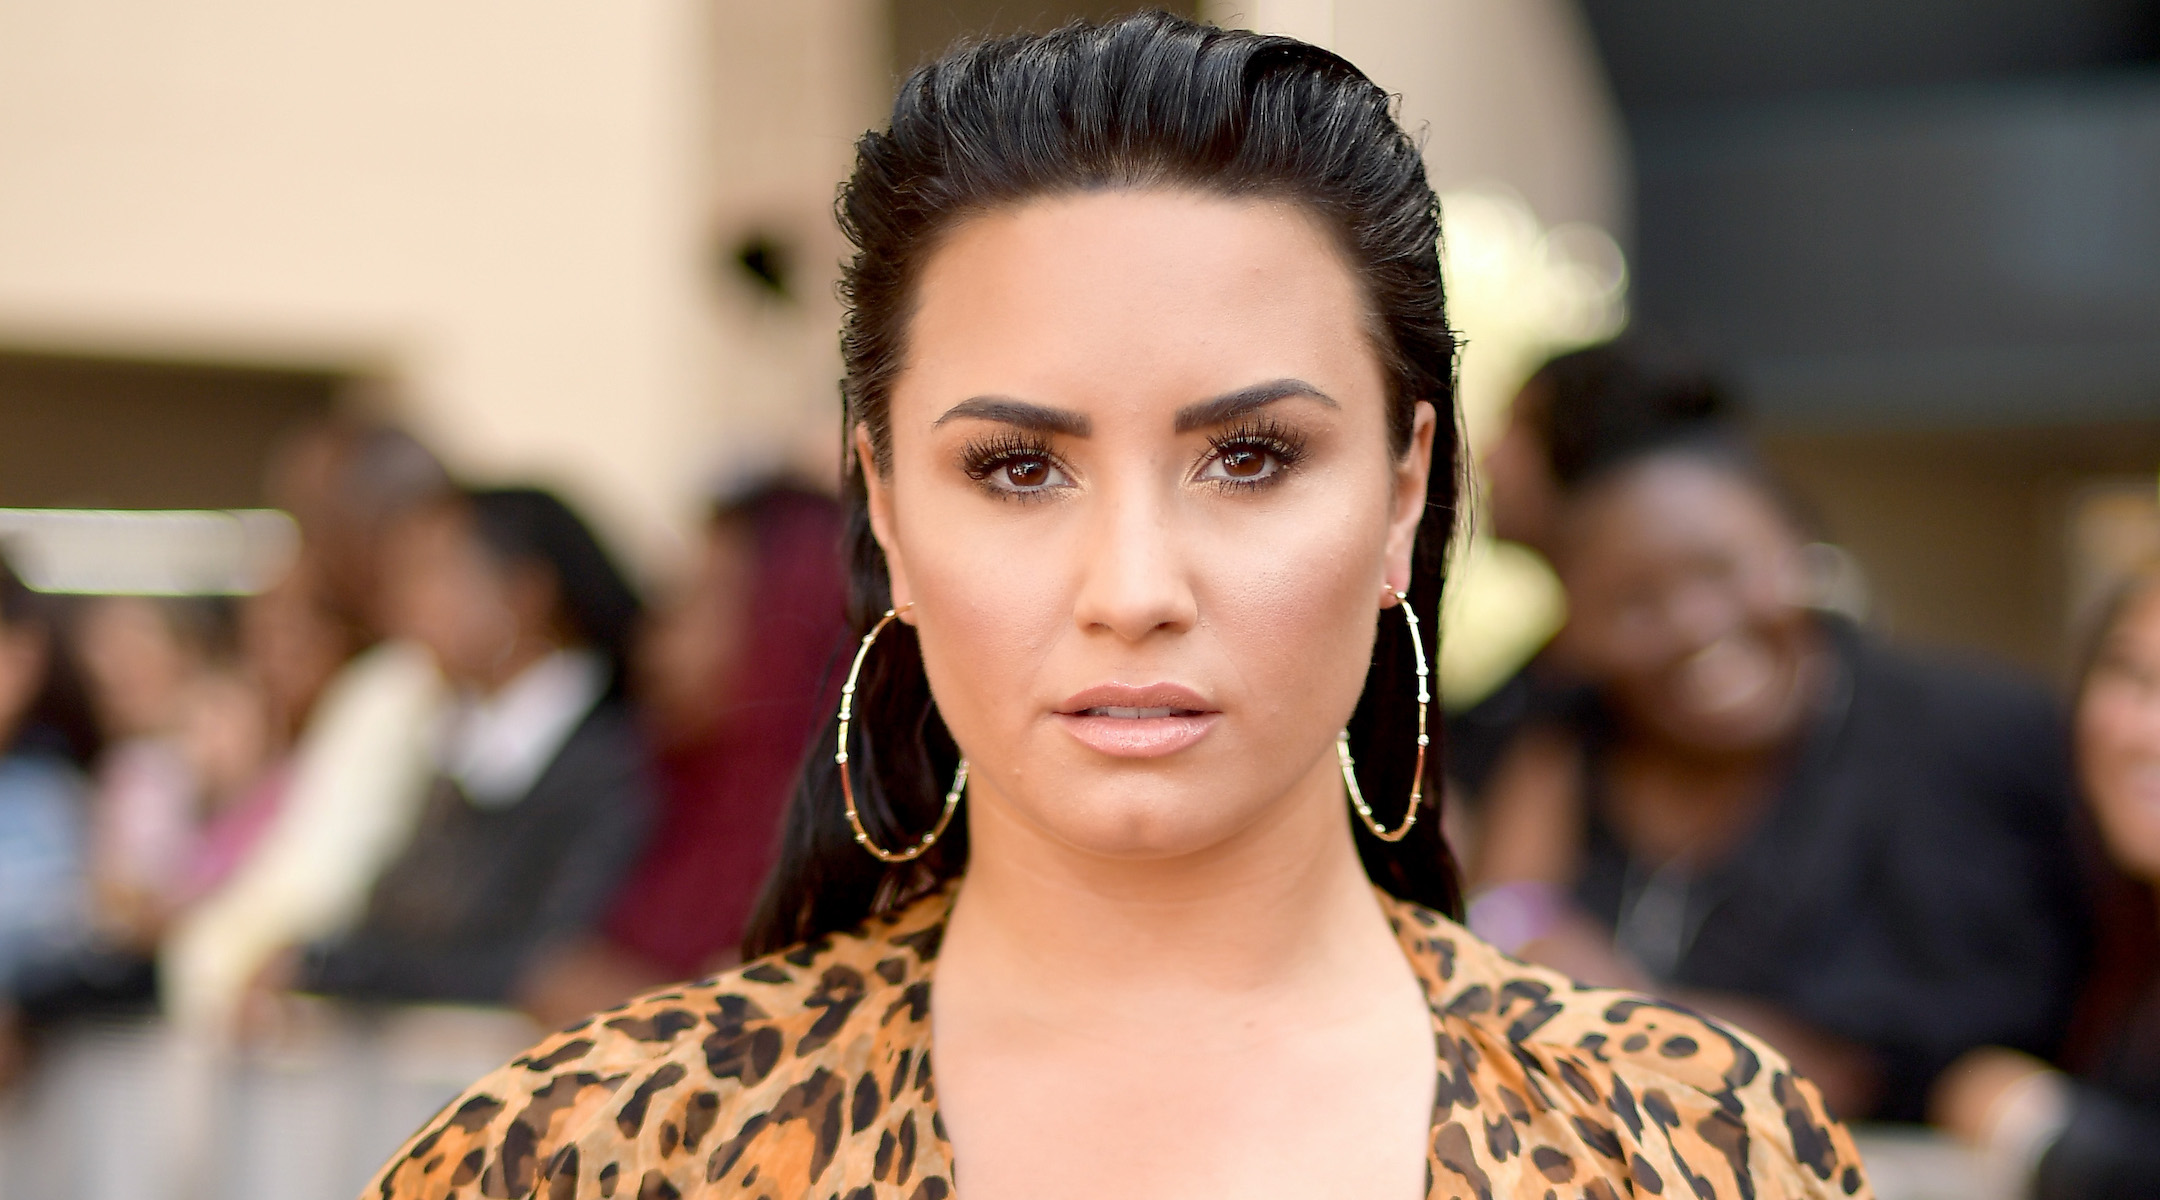 Singer Demi Lovato Shares Her Recent 'Accidental' Weight Loss